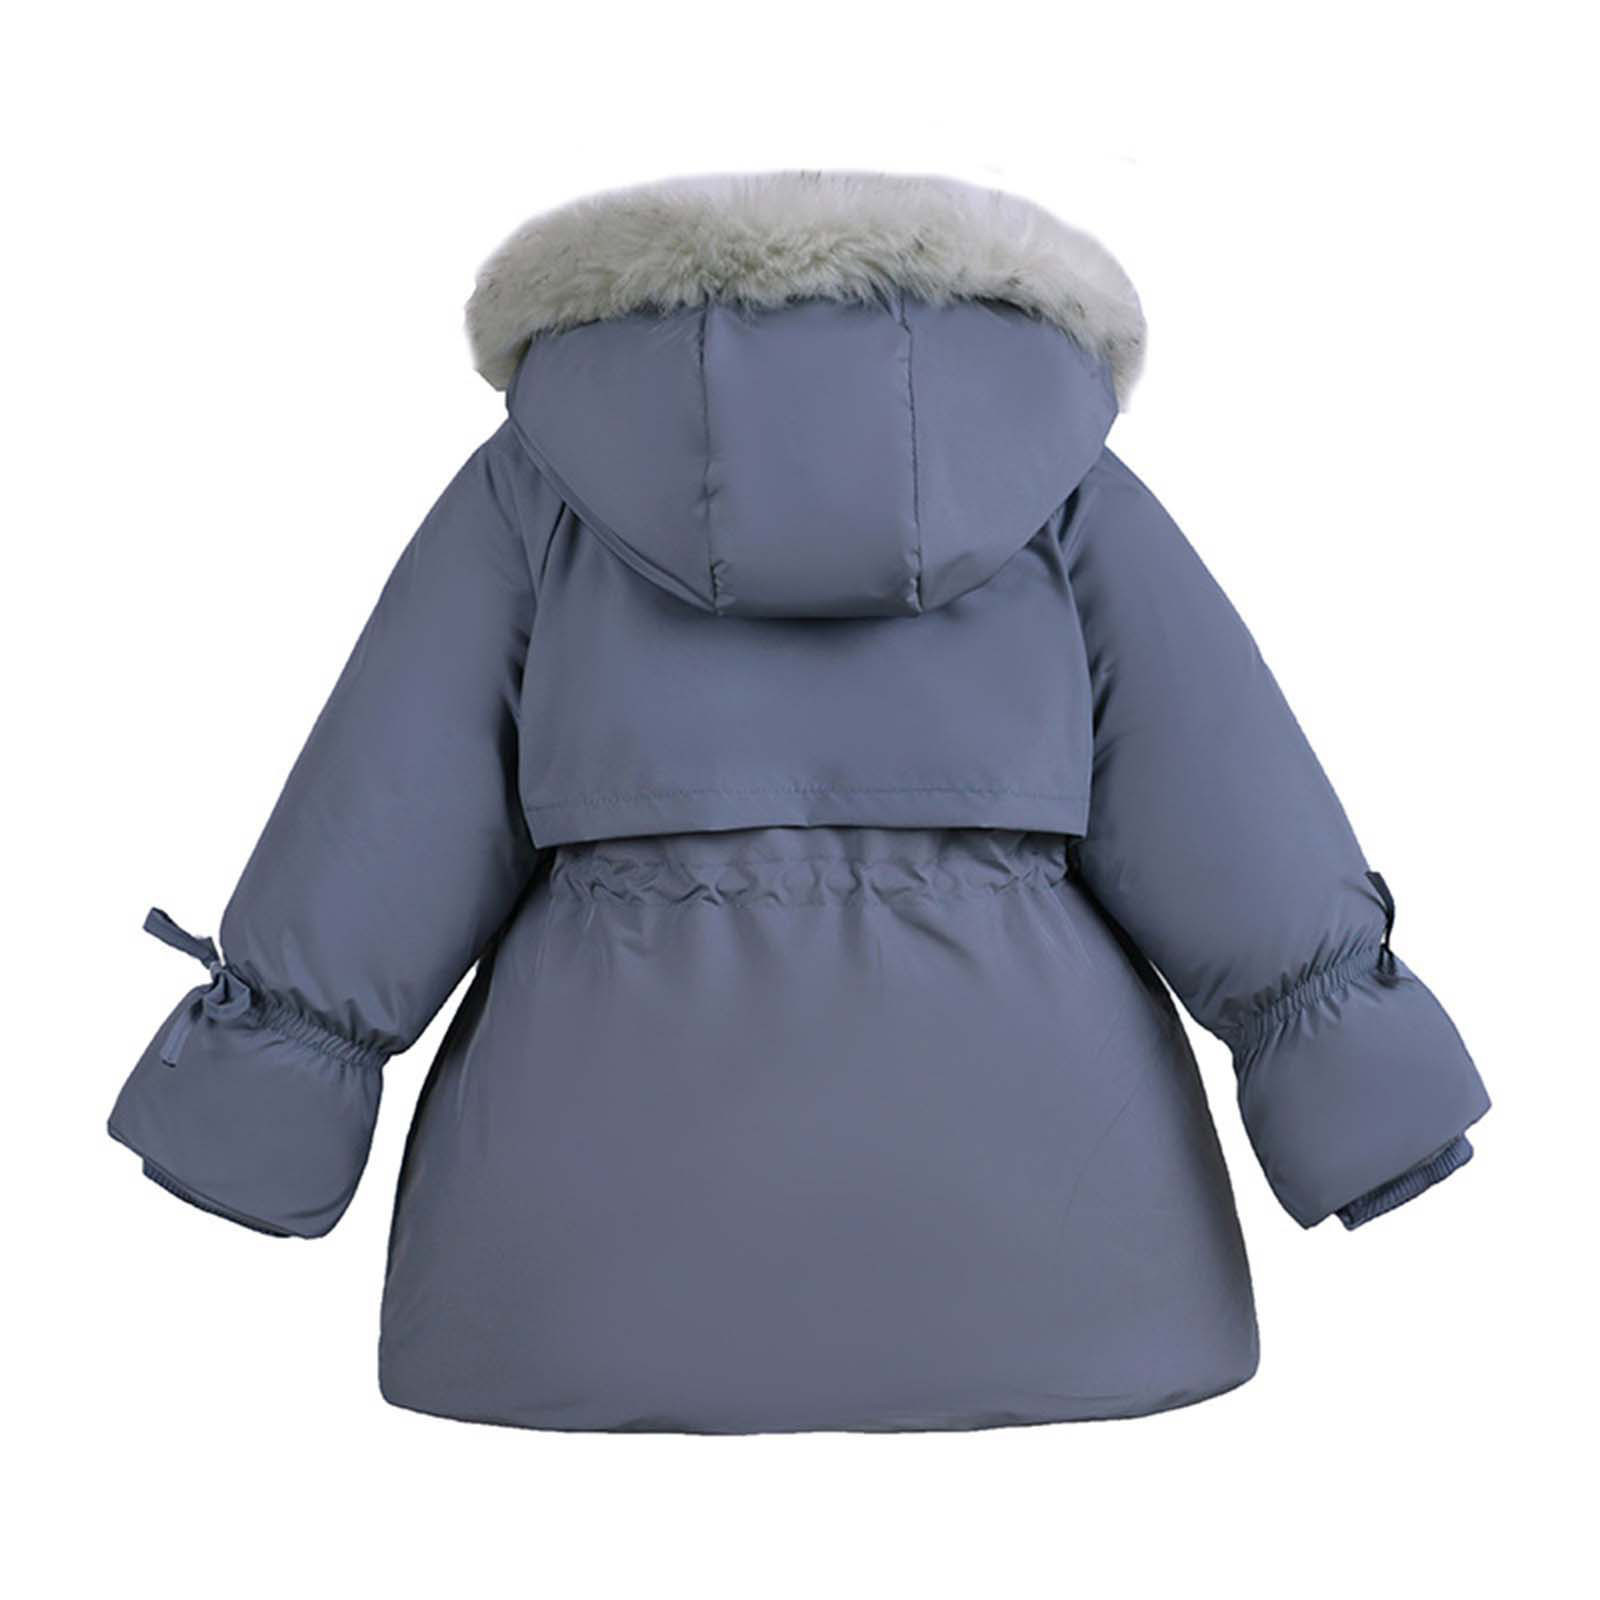 Children's Cotton Coat Girls Winter Slim Fit Warm Coats Puffer Coat Solid Color Thickened Hooded Fashion Casual Windproof Jacket Faux Fur Hood Parka Pocket Overcoat - image 5 of 8